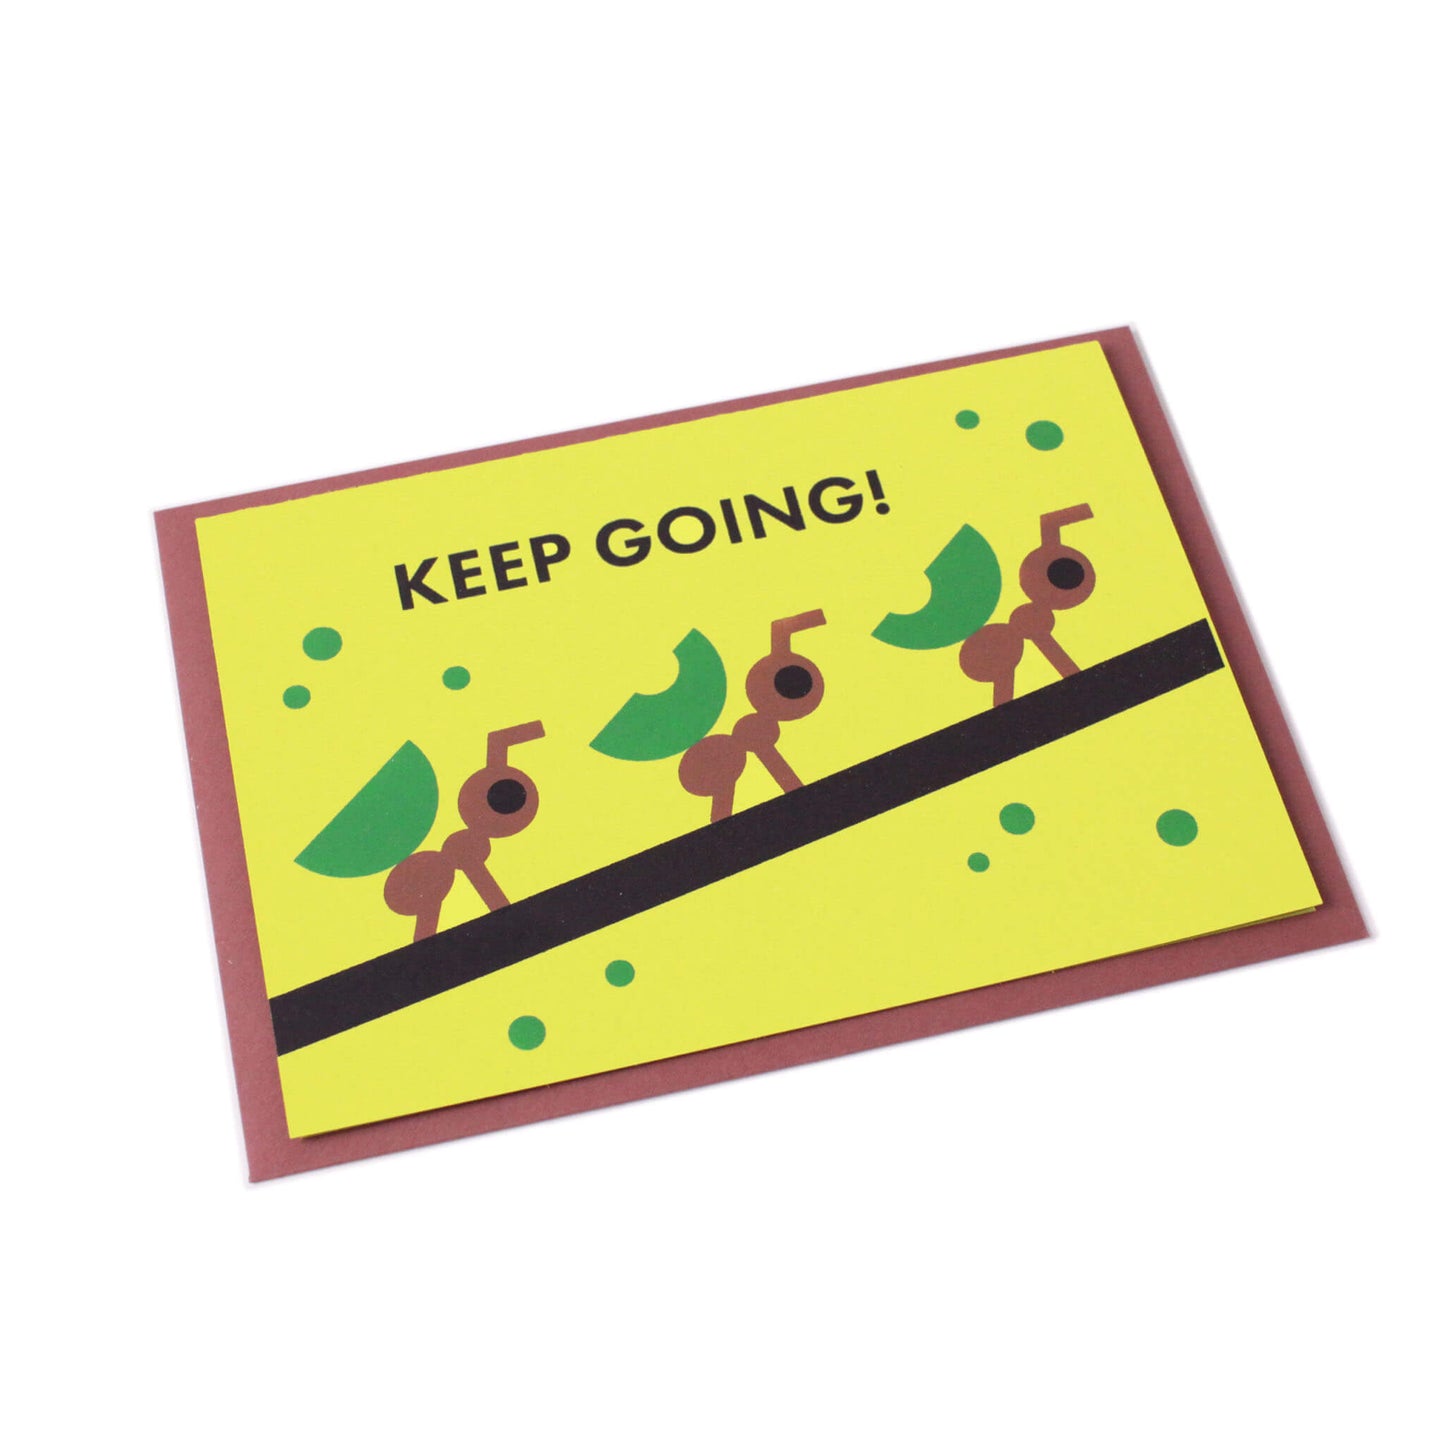 Green card featuring the text Keep going! and illustrated ants carrying leaves on a branch with a brown envelope.